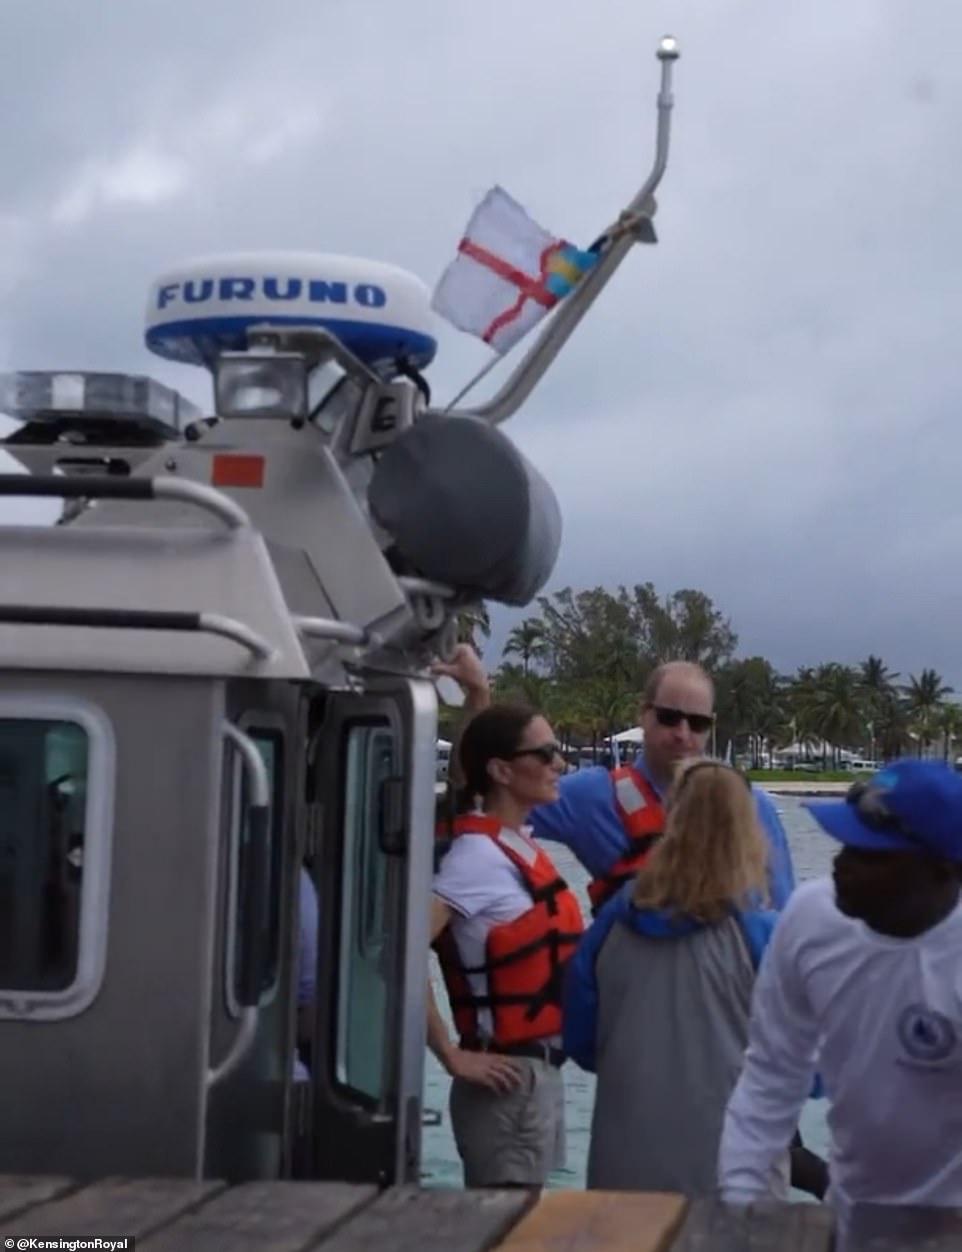 Safety first: The Duke and Duchess of Cambridge wear life jackets during the Regatta in the Bahamas yesterday afternoon